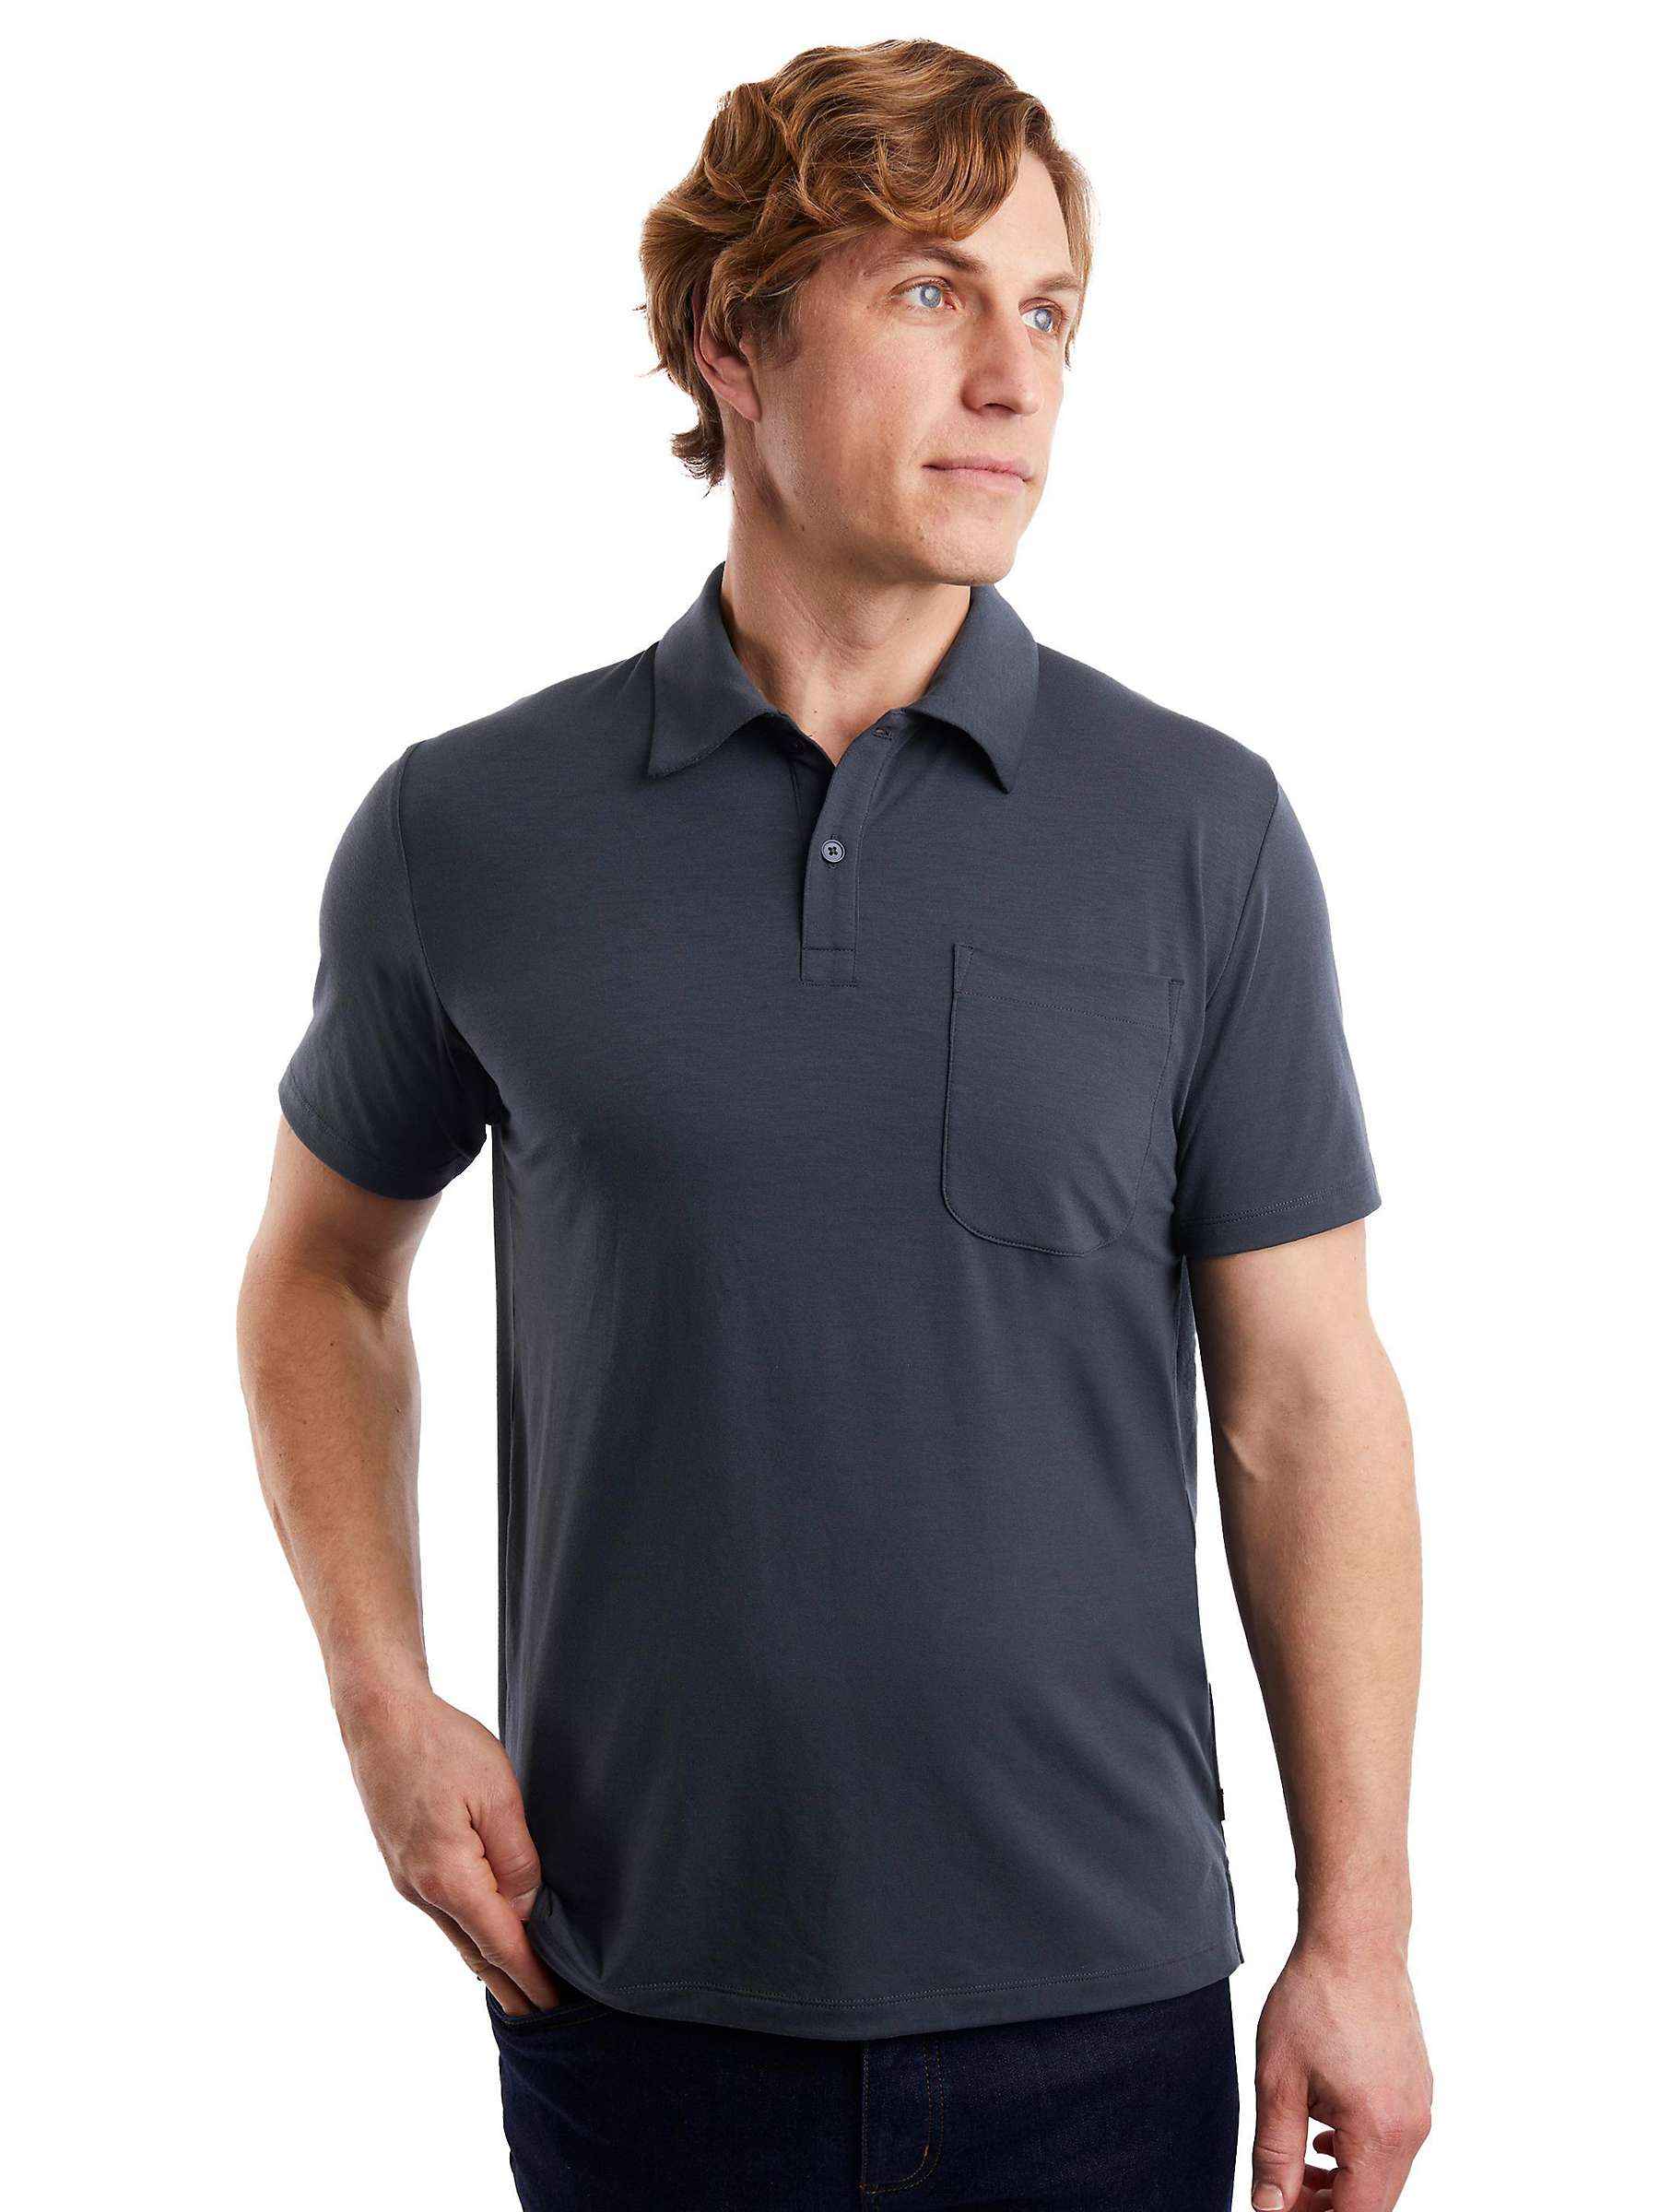 Buy Rohan Global Short Sleeve Polo Top Online at johnlewis.com